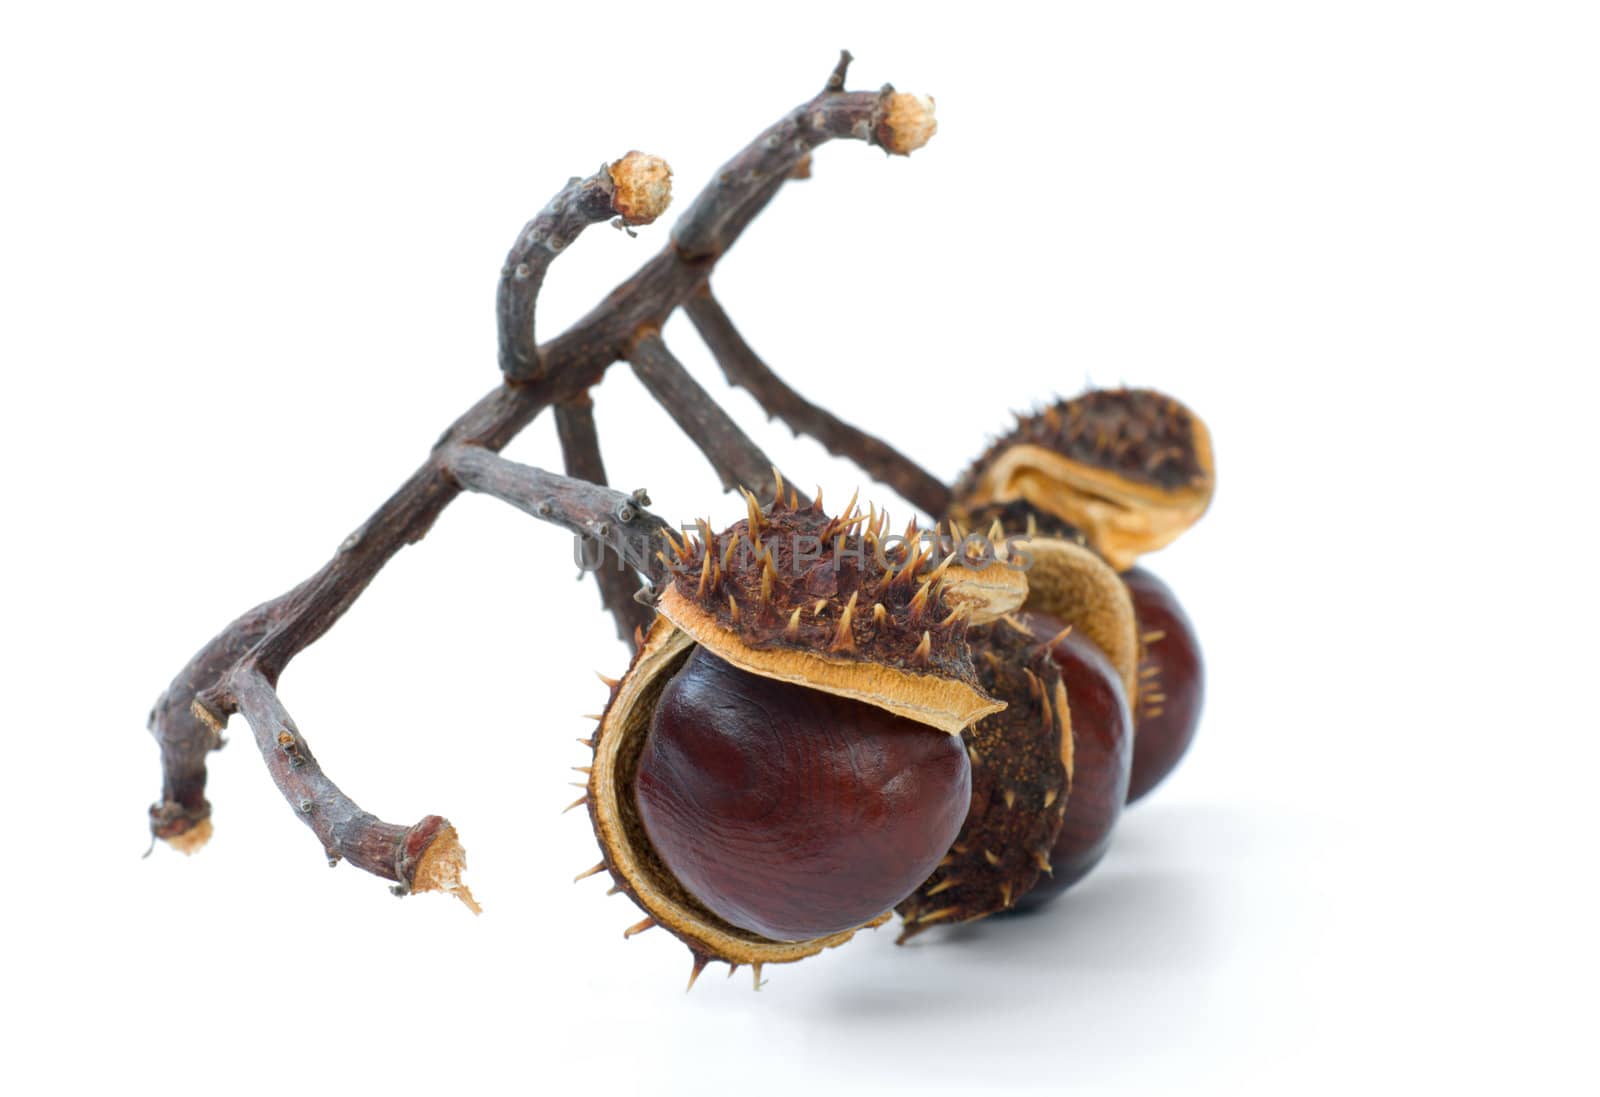 Branch with chestnuts in a peel